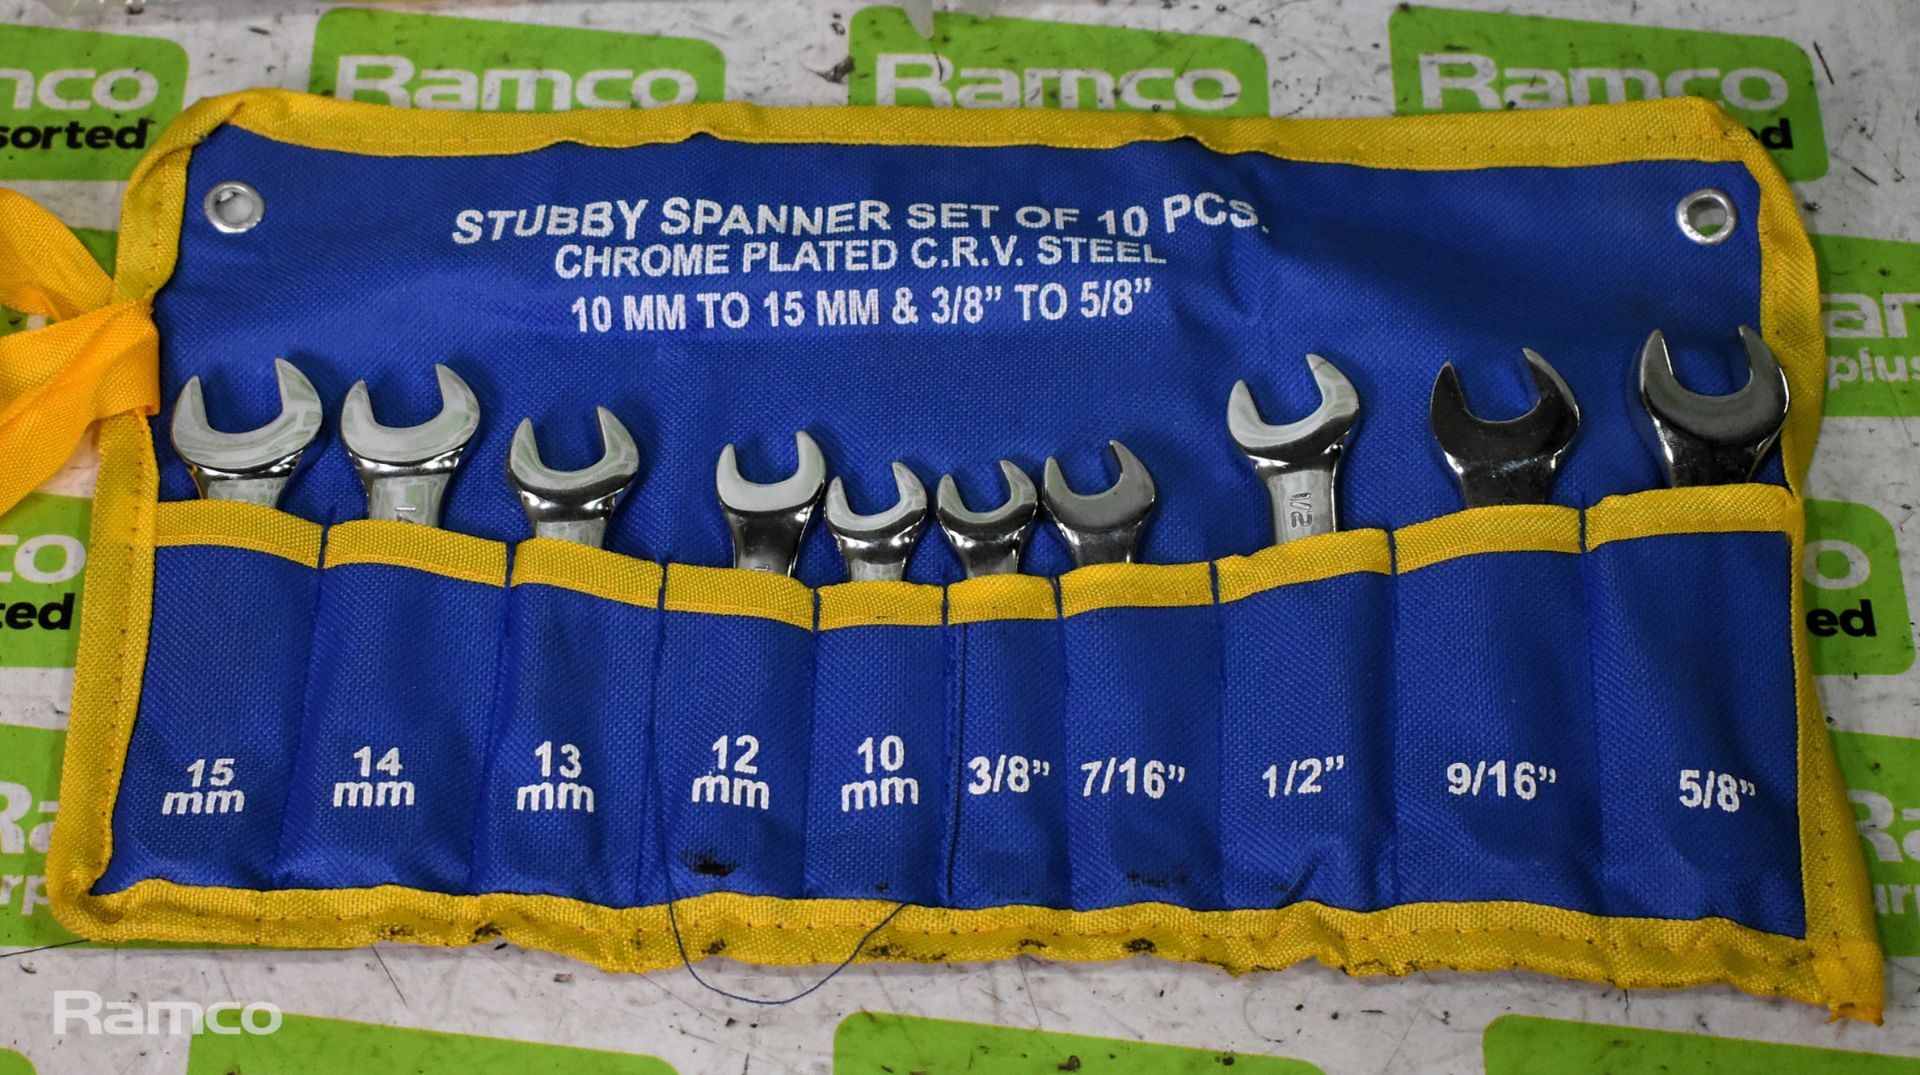 5x 10 piece stubby spanner sets, 100x Neilsen ultra thin steel cutting discs 115mm & more - Image 2 of 11